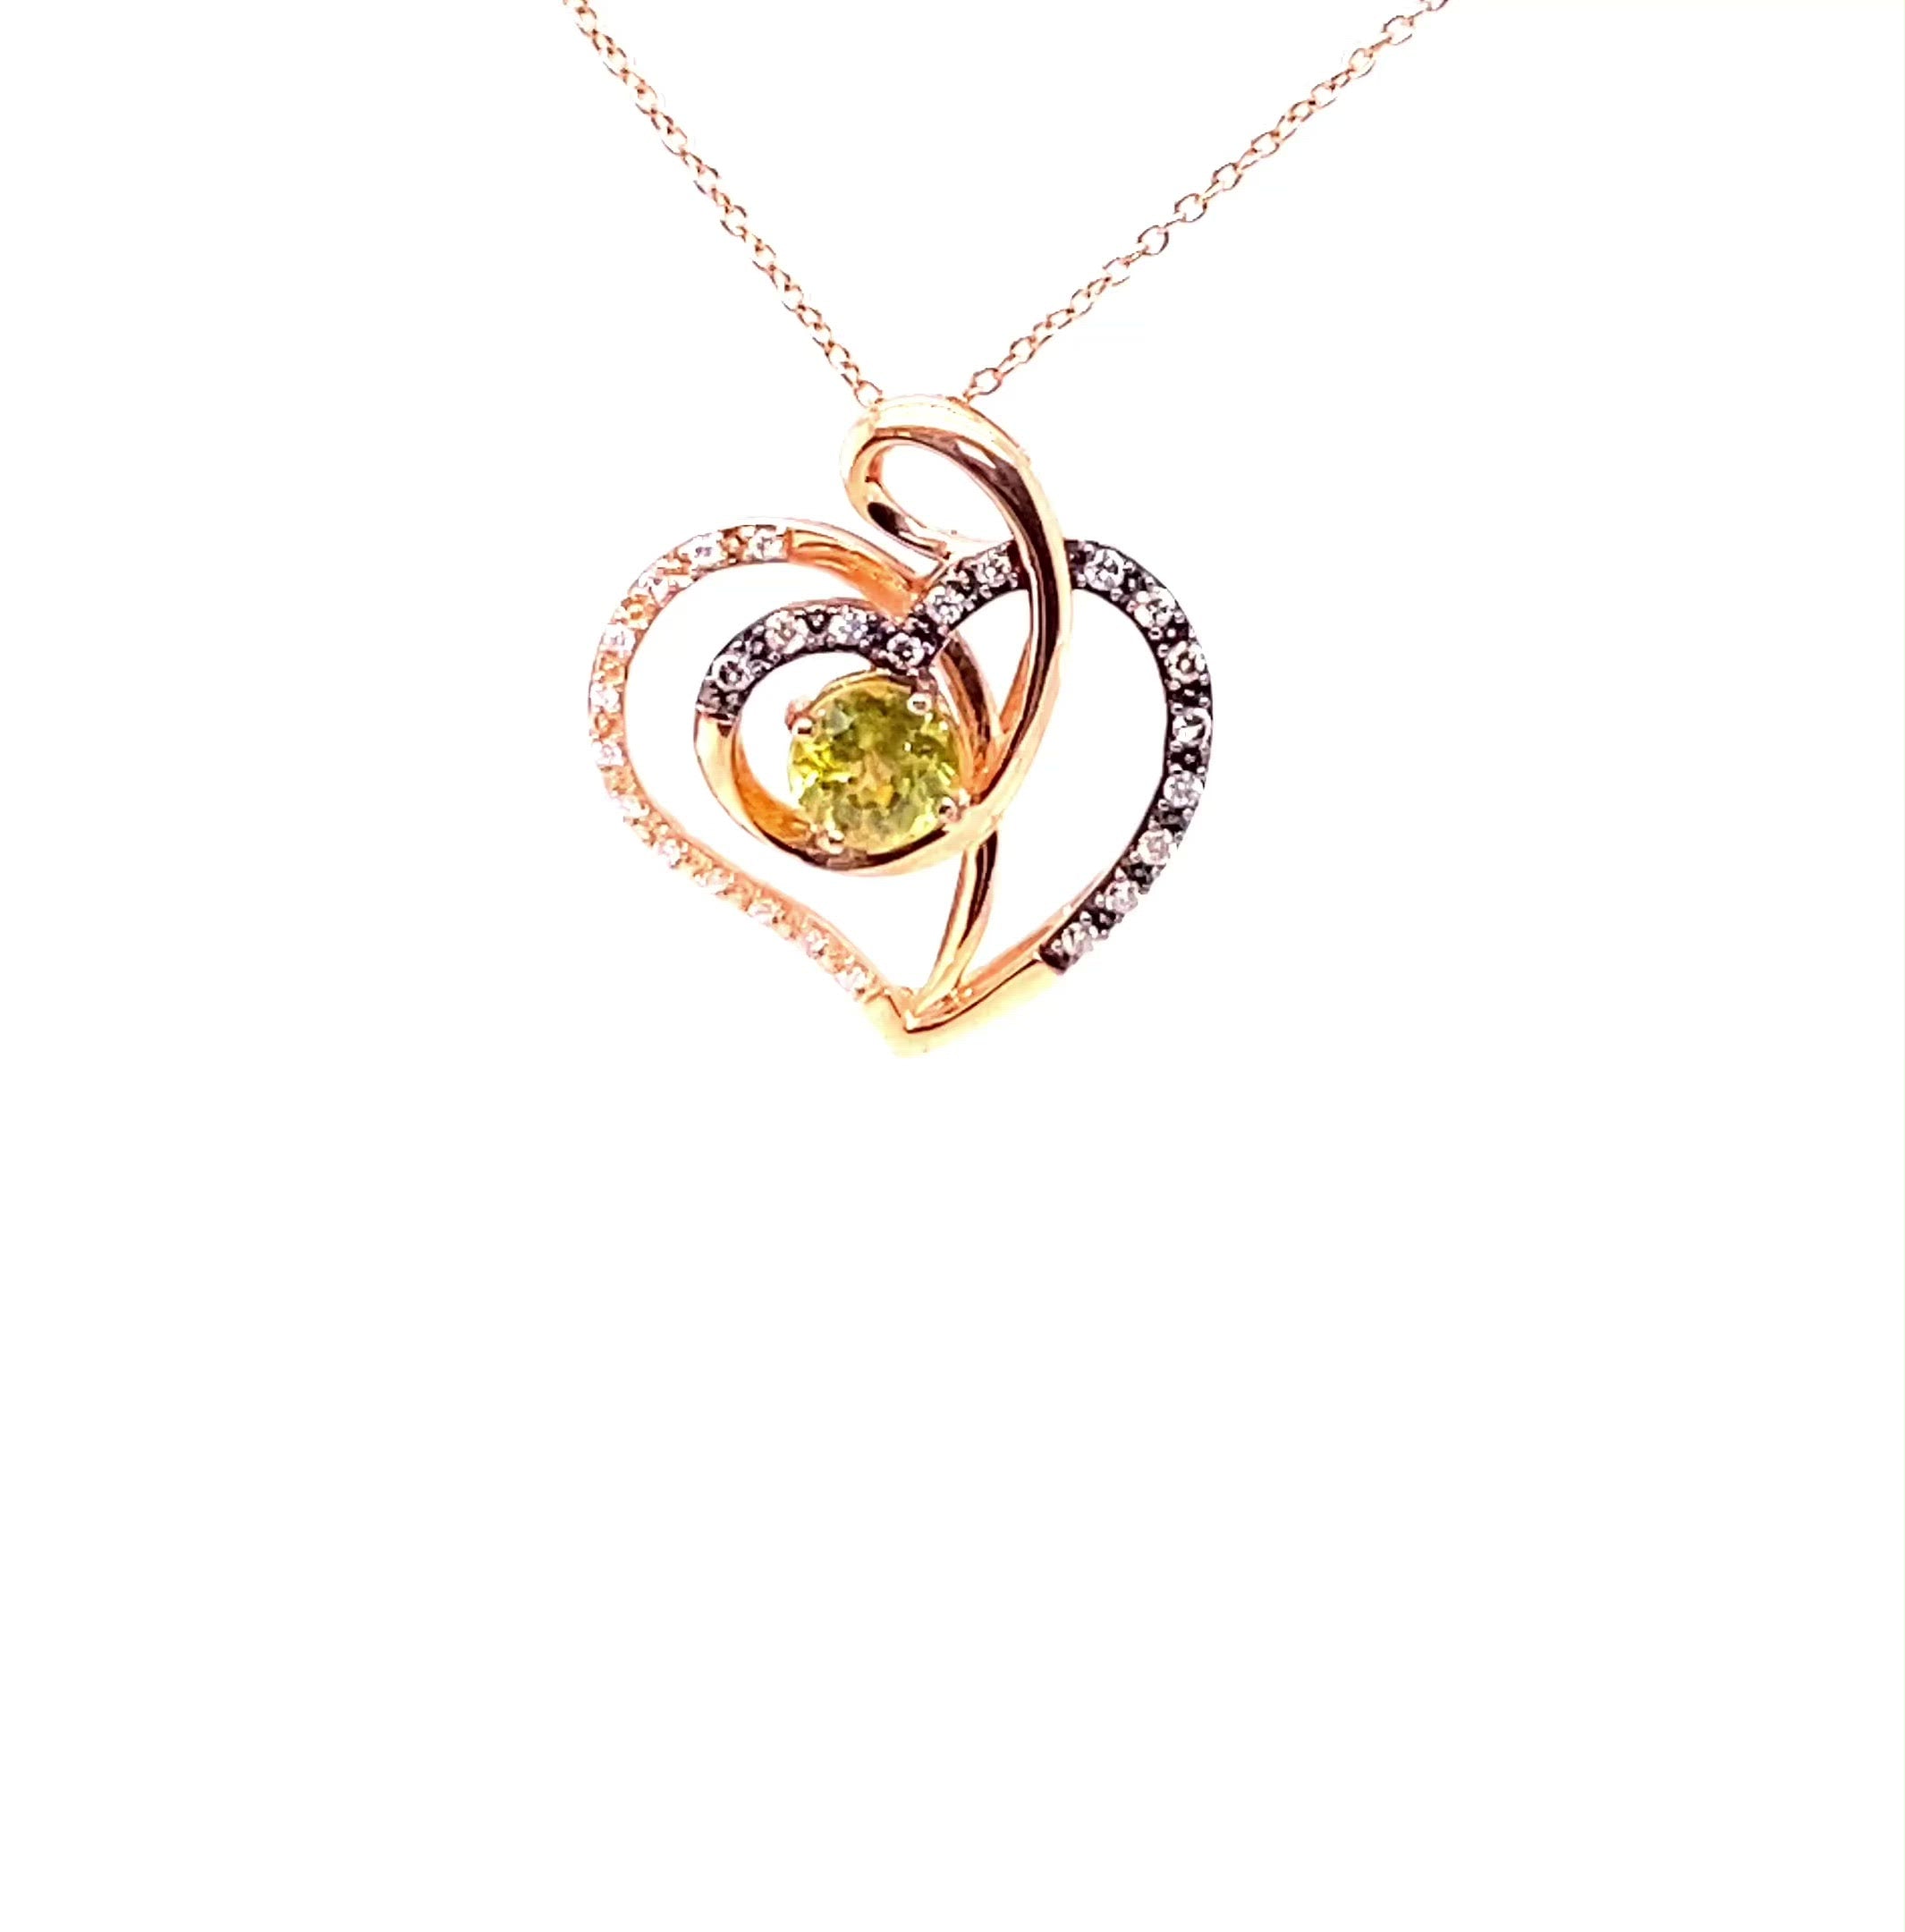 LeVian Natural Sphene & Diamond Necklace 14K Solid Rose Gold .96tcw Heart Necklace Limited Edition Necklace LeVian Bridal Titanite Necklace